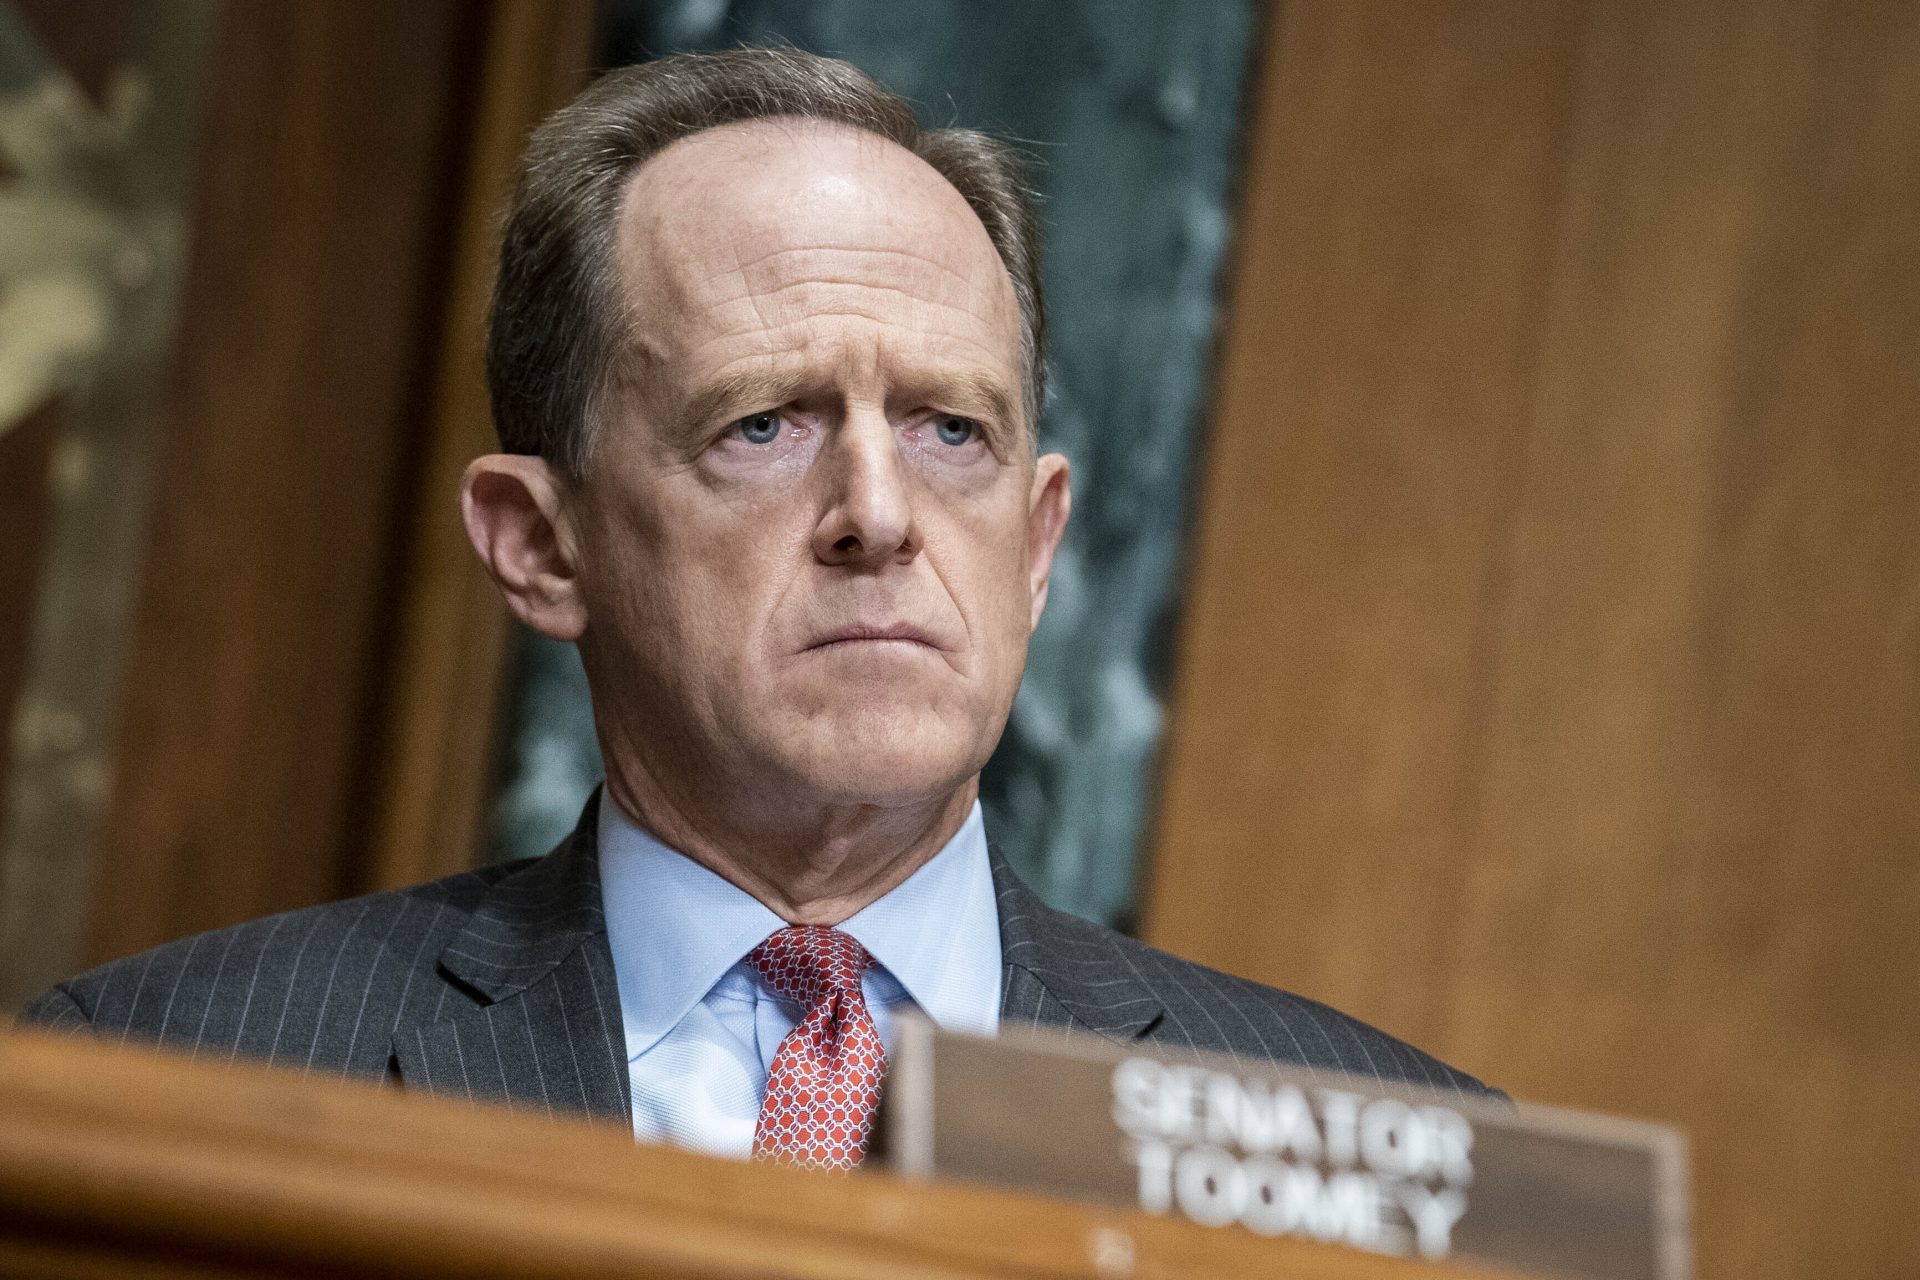 Sen. Pat Toomey, R-Pa., during a hearing on Capitol Hill in Washington, Thursday Dec. 10, 2020.